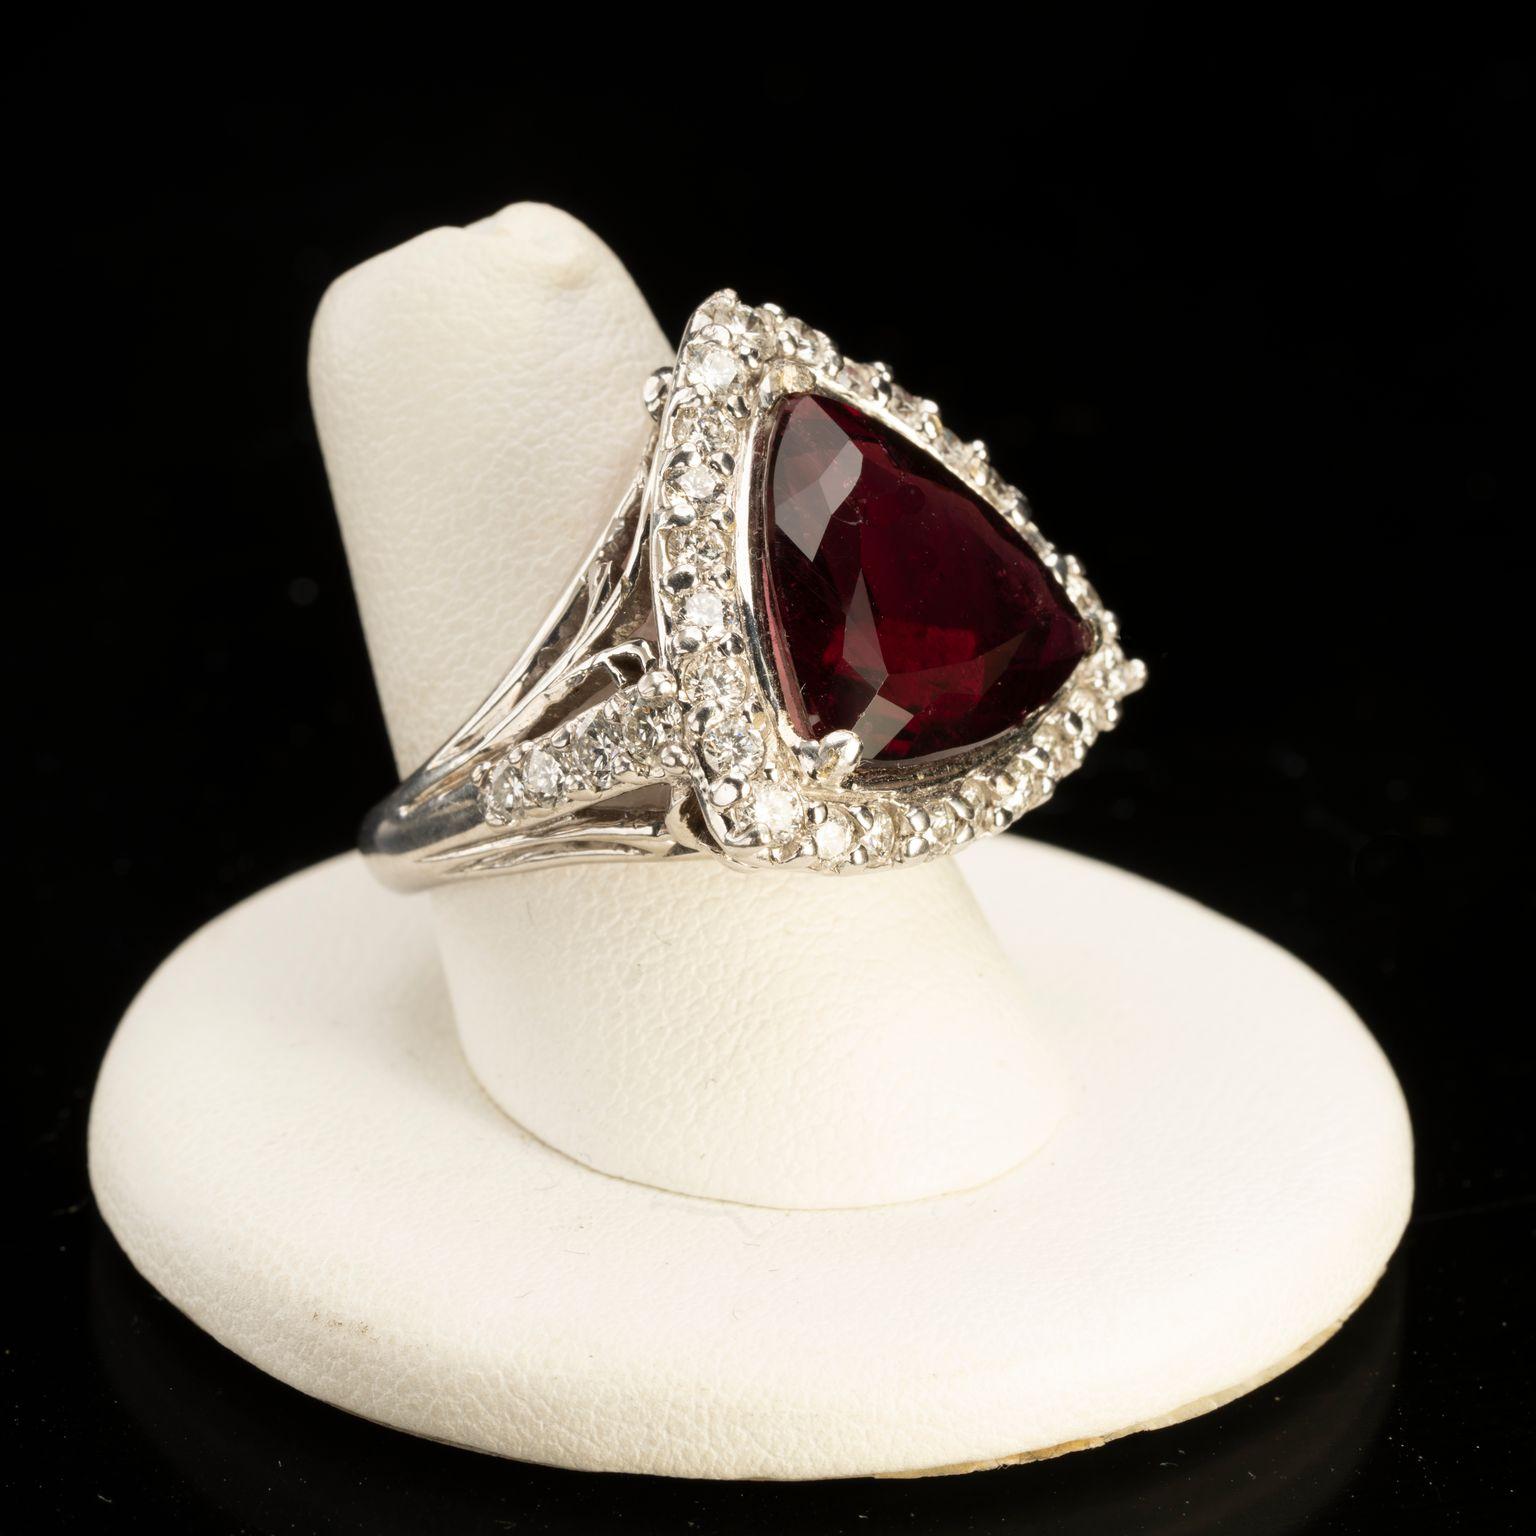 This absolutely stunning piece features a huge, dazzling, deeply-hued triangle-cut rubellite (pink tourmaline) surrounded by a plethora of brilliant white diamonds and set in an ornately detailed white gold band with accenting diamonds on the sides.